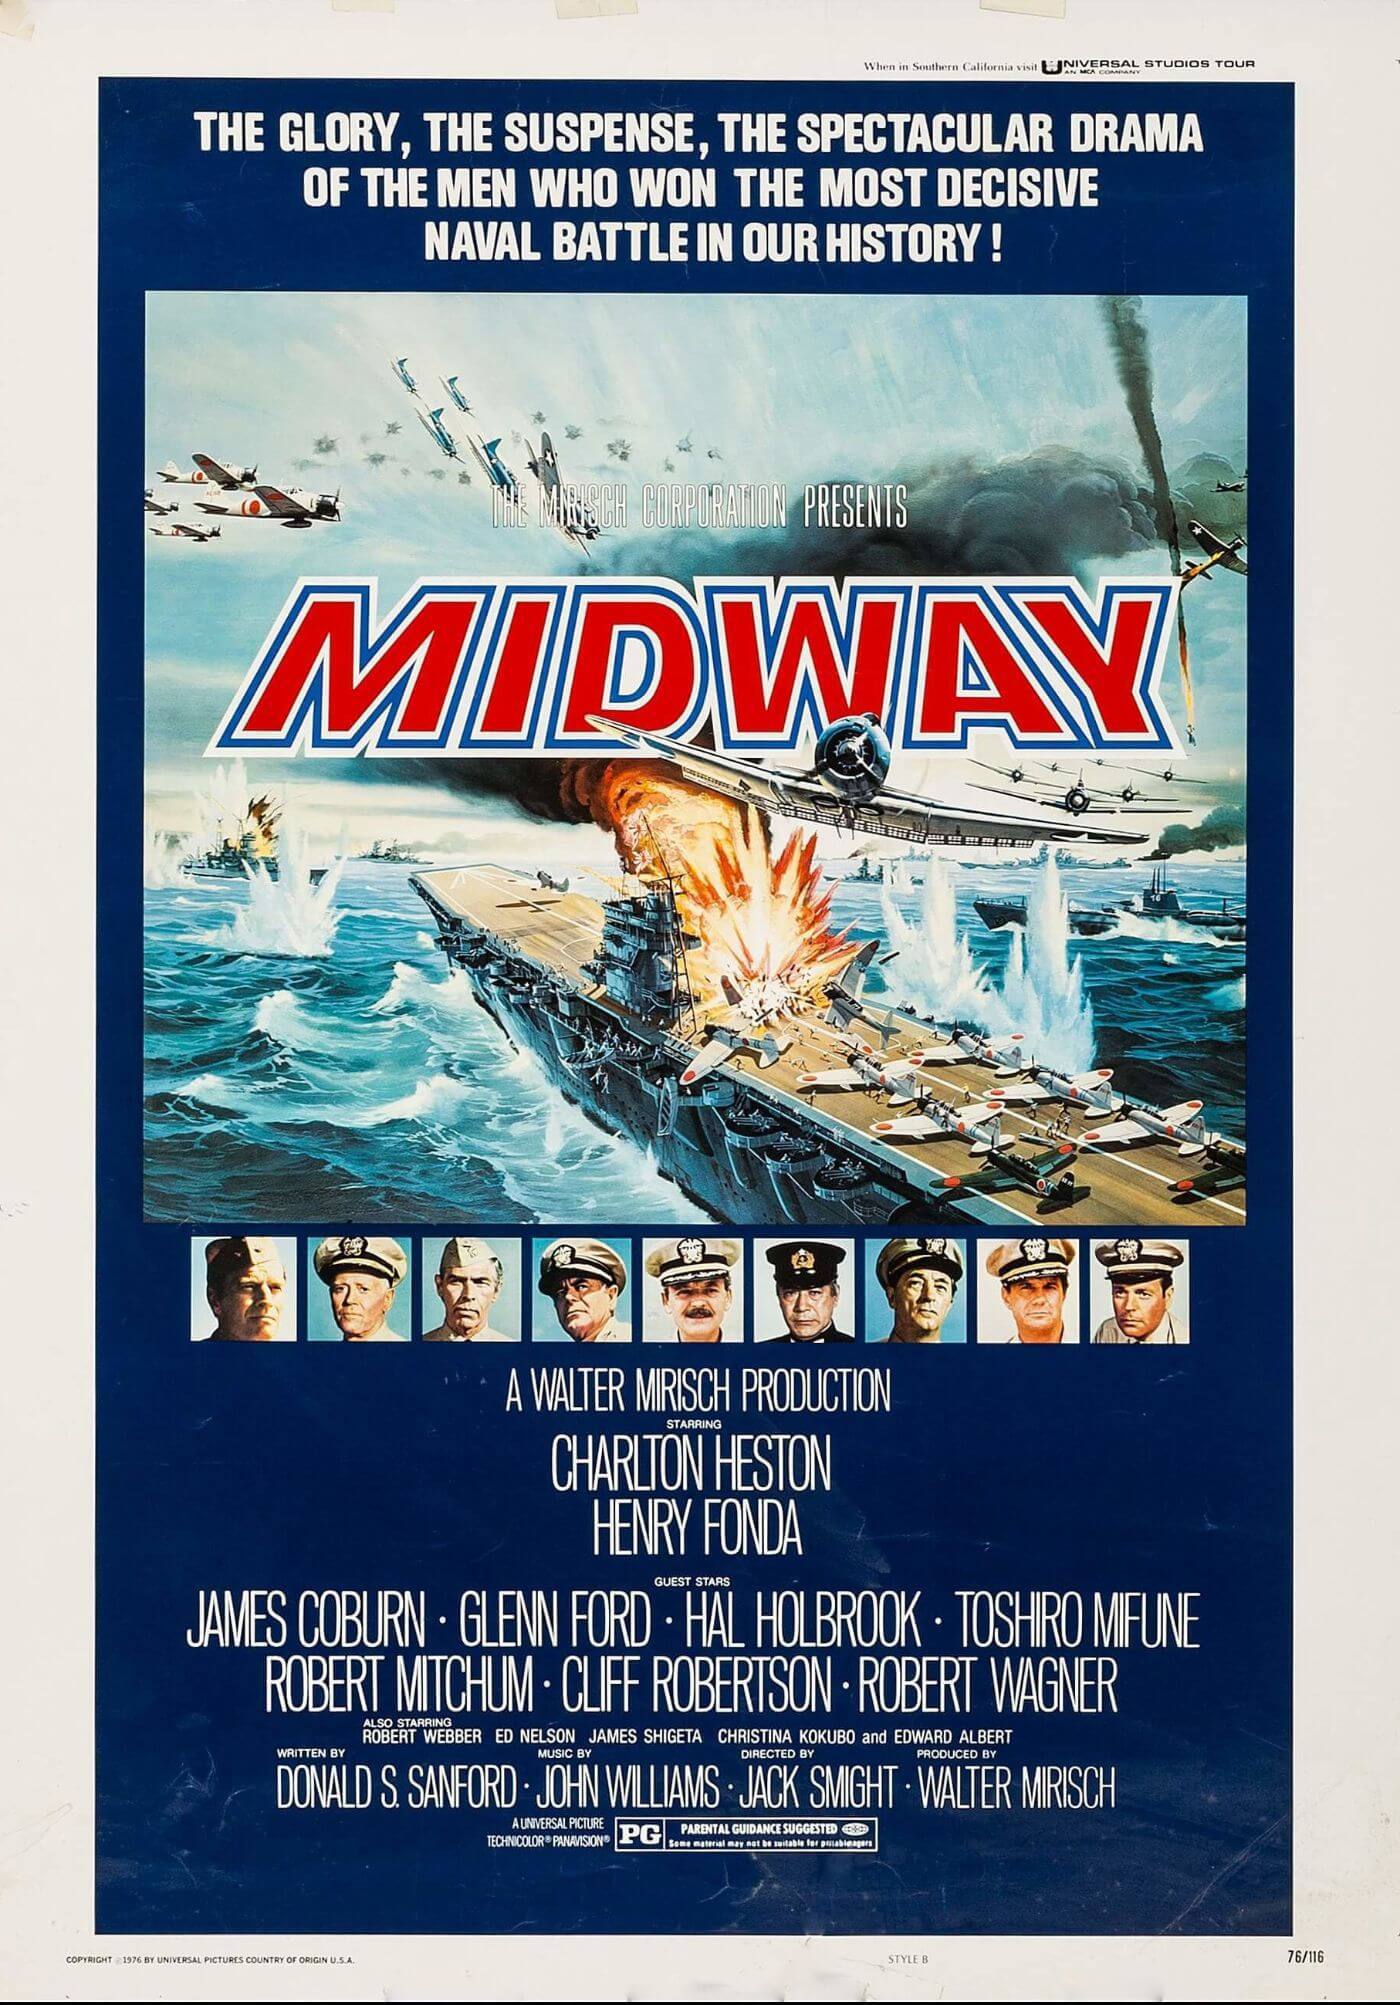 Midway Charlton Heston Henry Fonda Hollywood Wwii War Classics Original Movie Poster Life Size Posters By Kaiden Thompson Buy Posters Frames Canvas Digital Art Prints